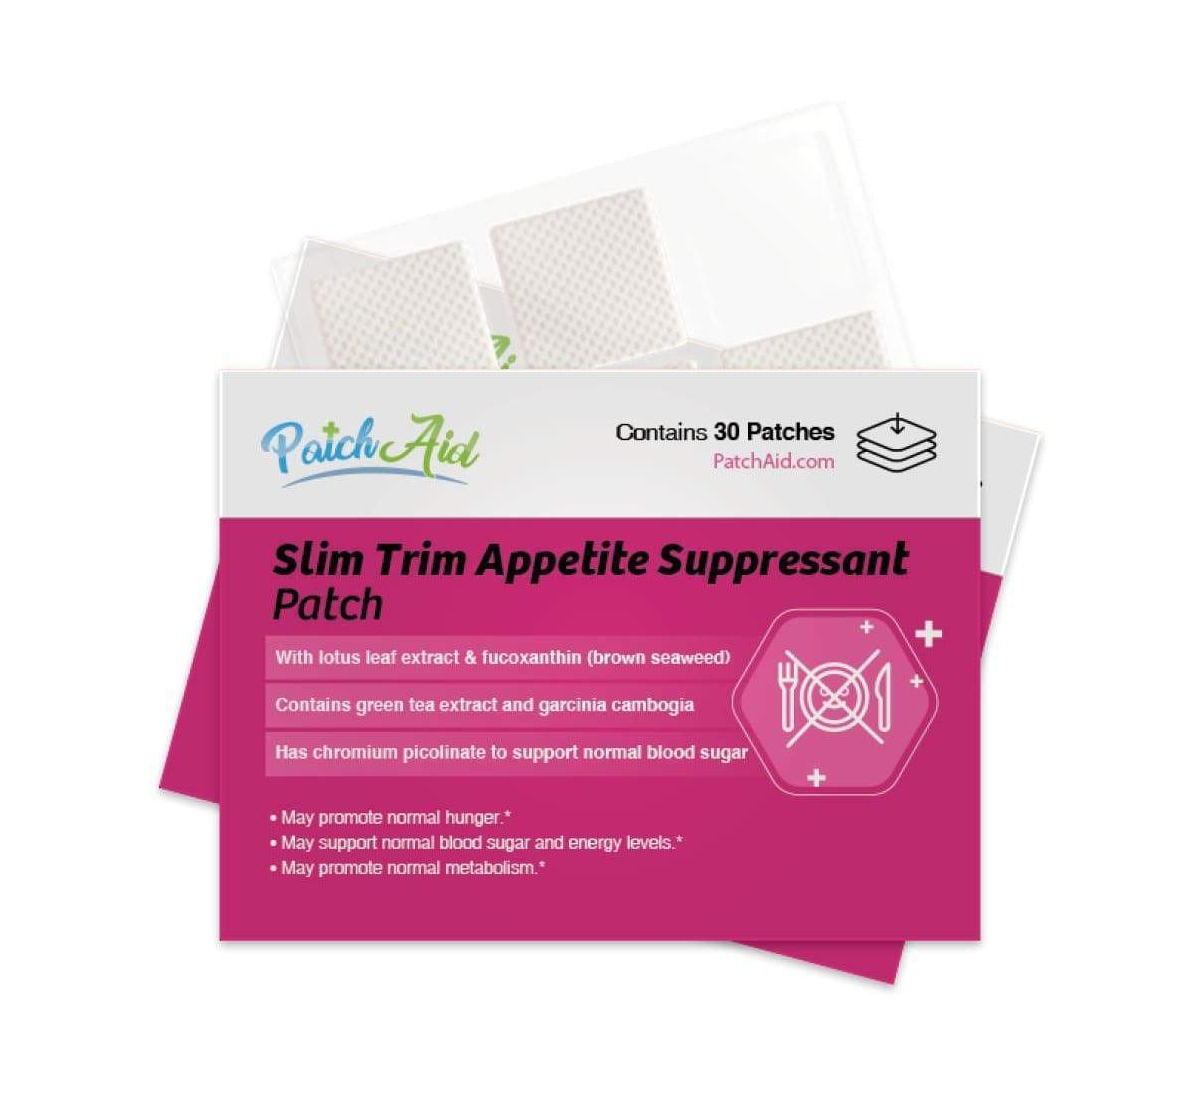 Slim Trim Appetite Suppressant Patch by PatchAid (30-Day Supply) - White